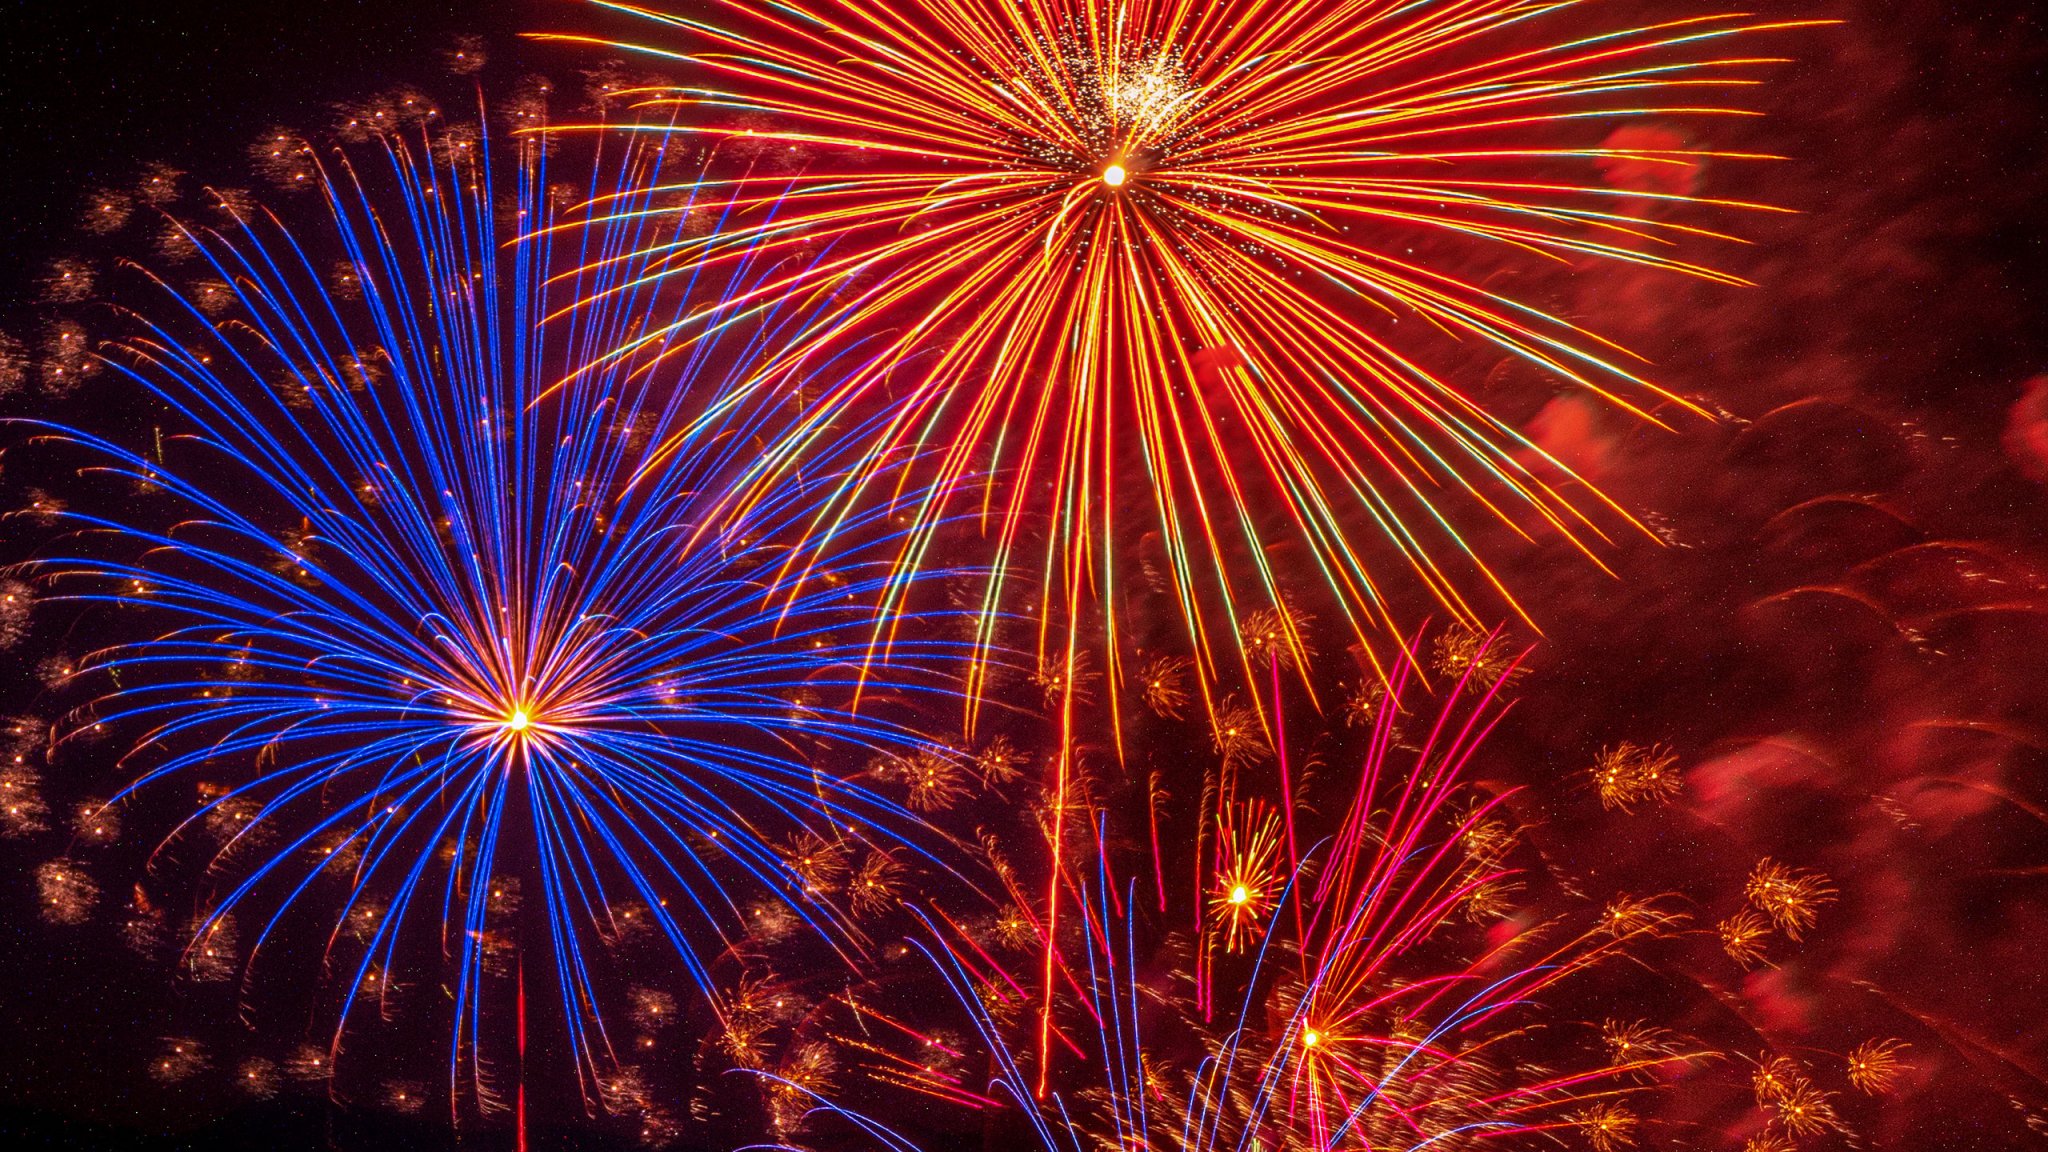 Seven ideas to get solid fireworks photos